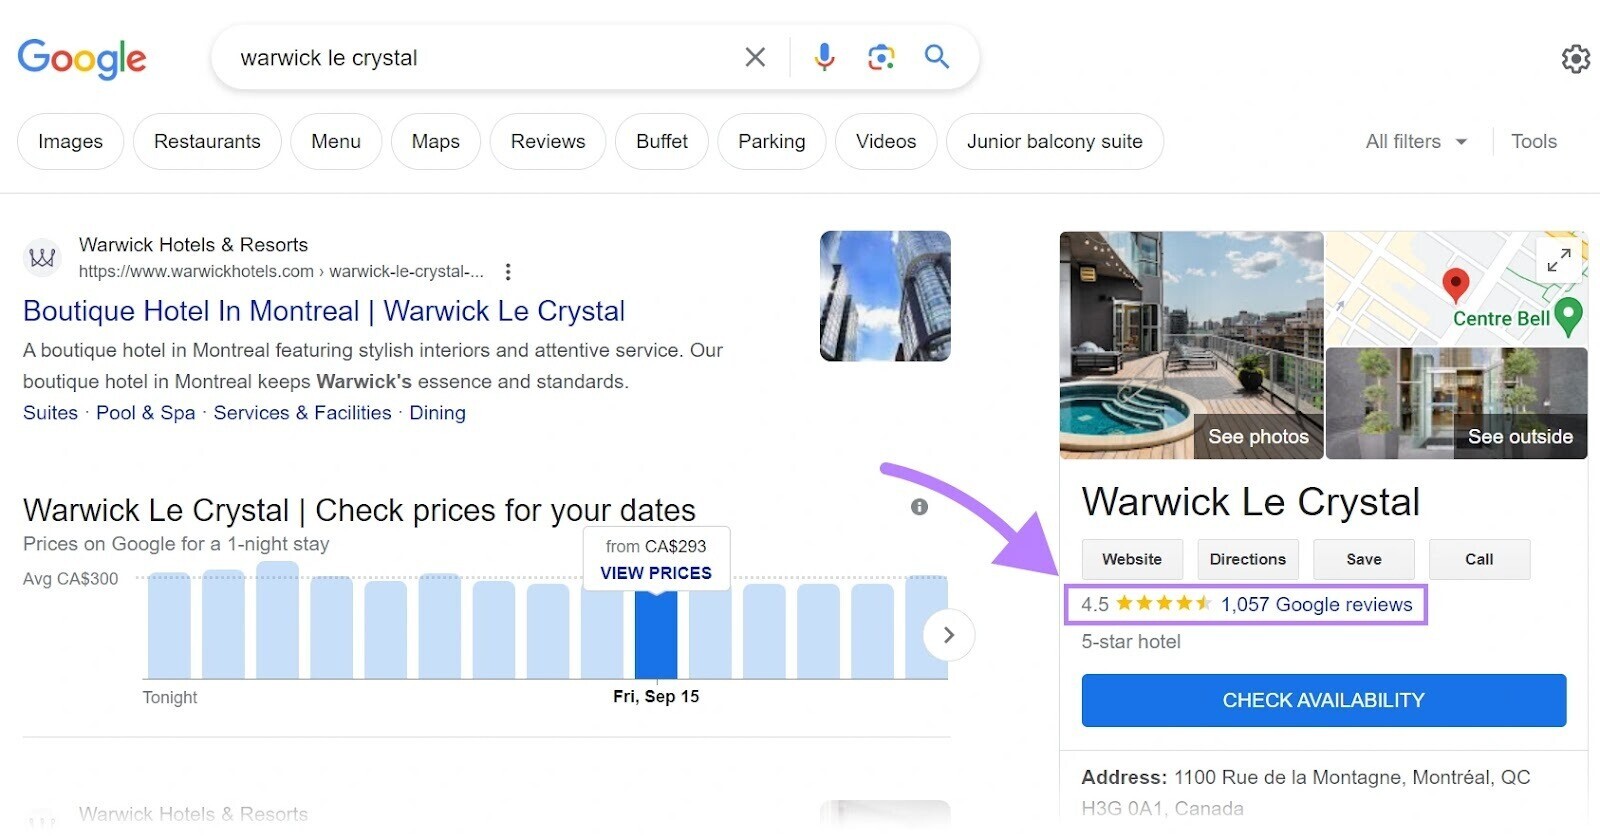 ratings and reviews shown for "Warwick Le Crystal" in Google SERP